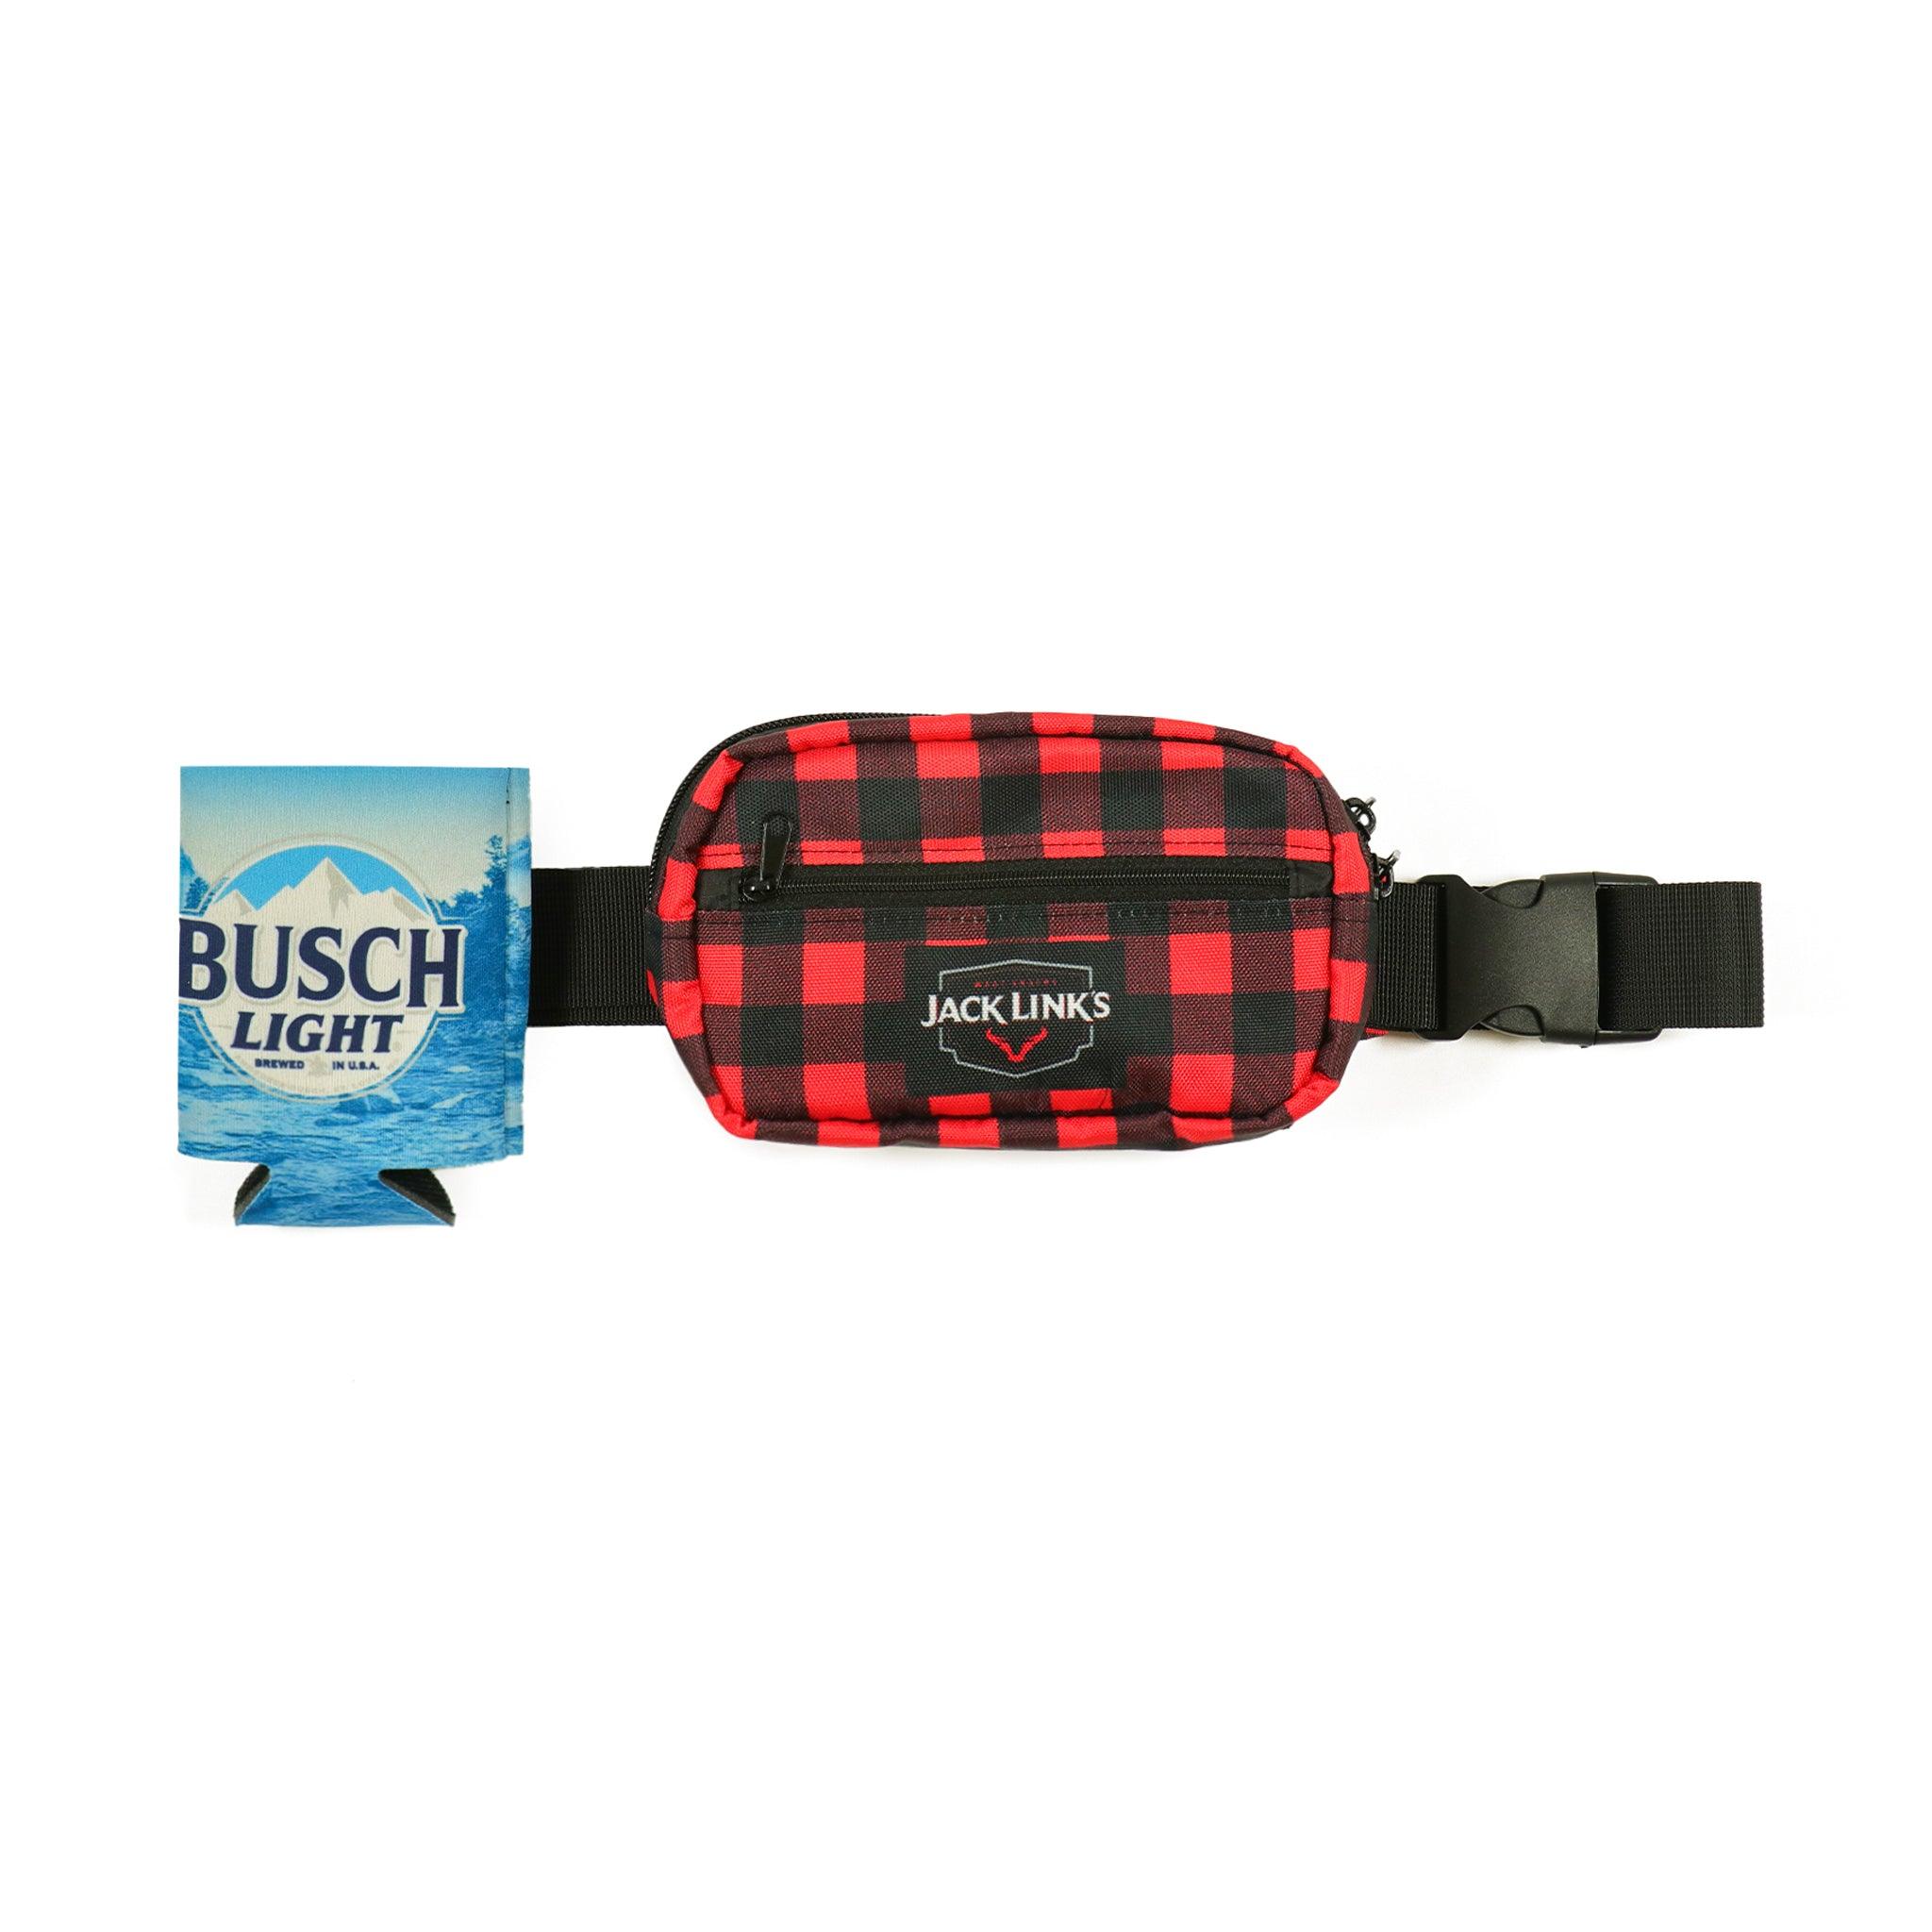 BUSCH LIGHT X JACK LINK FANNY PACK WITH COOLIE